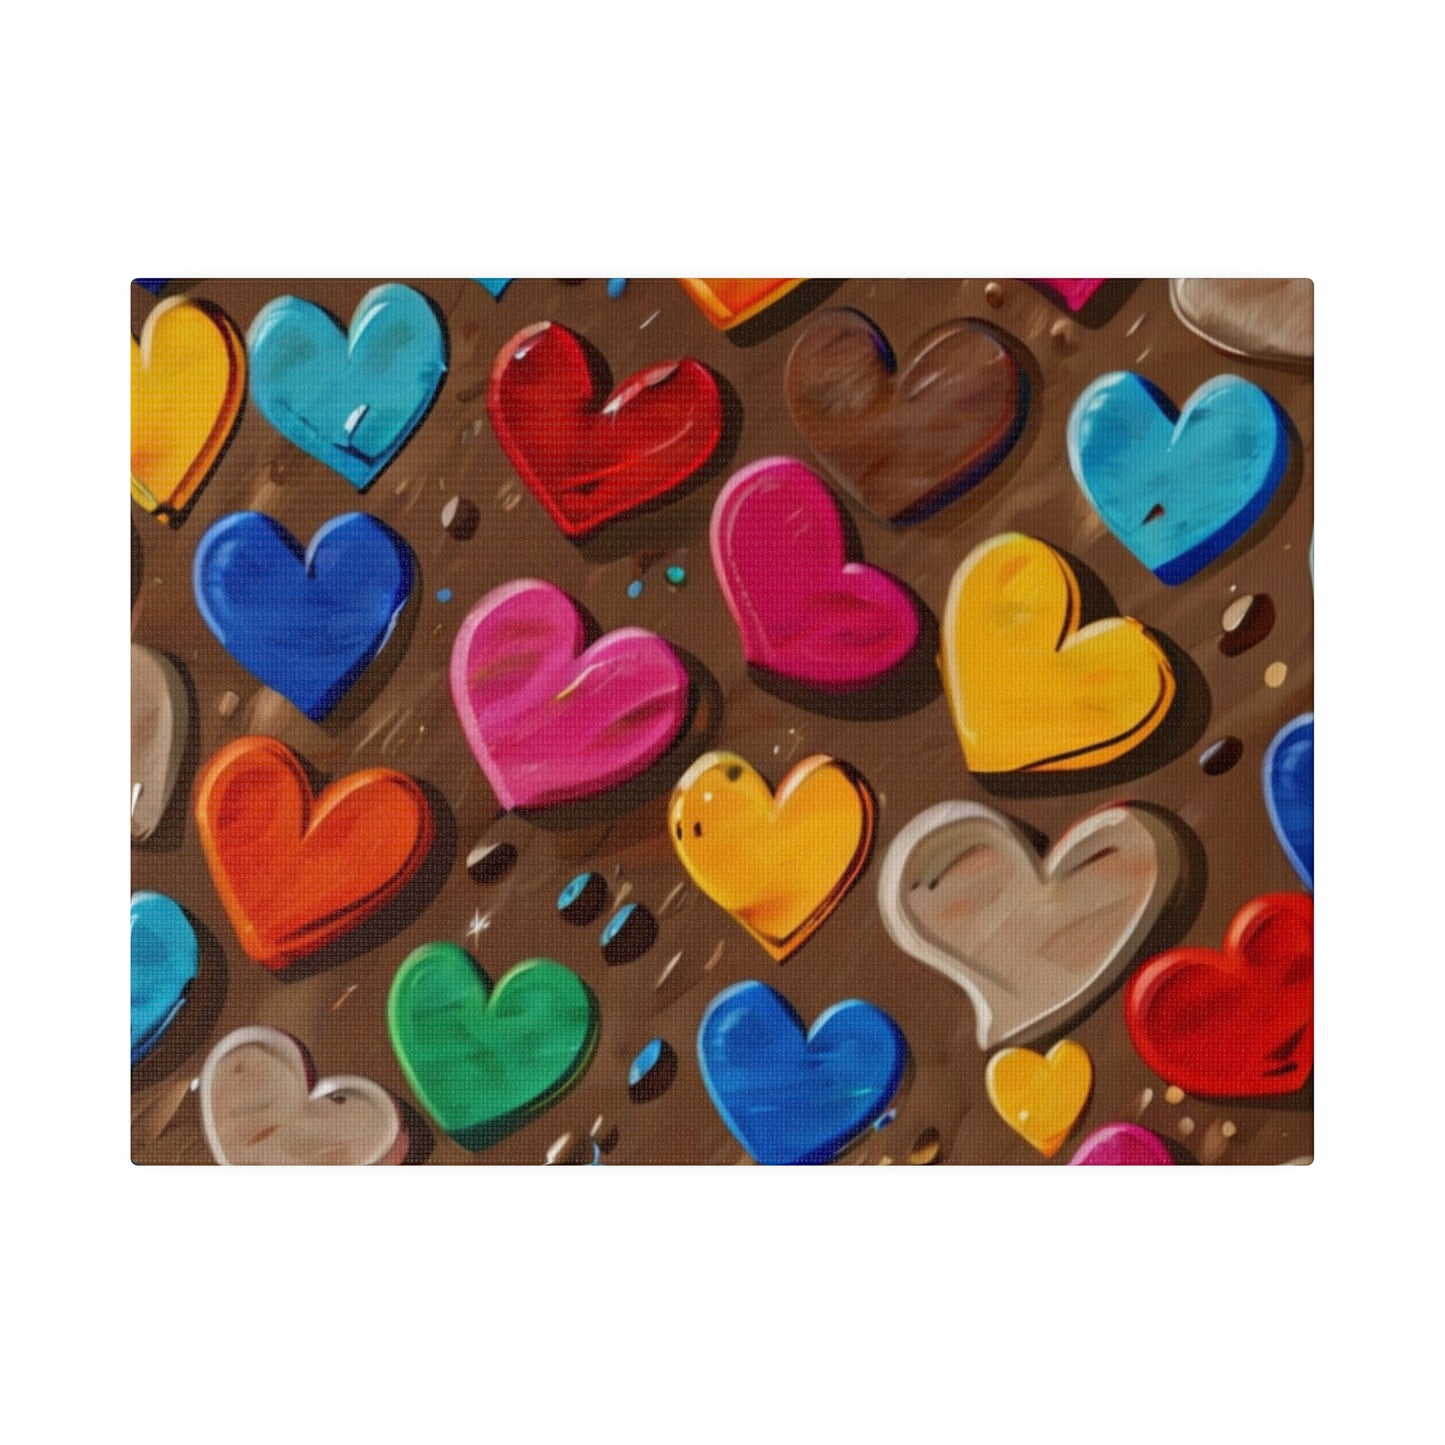 Colourful Love Hearts Swimming In Coffee - Matte Canvas, Stretched, 0.75"